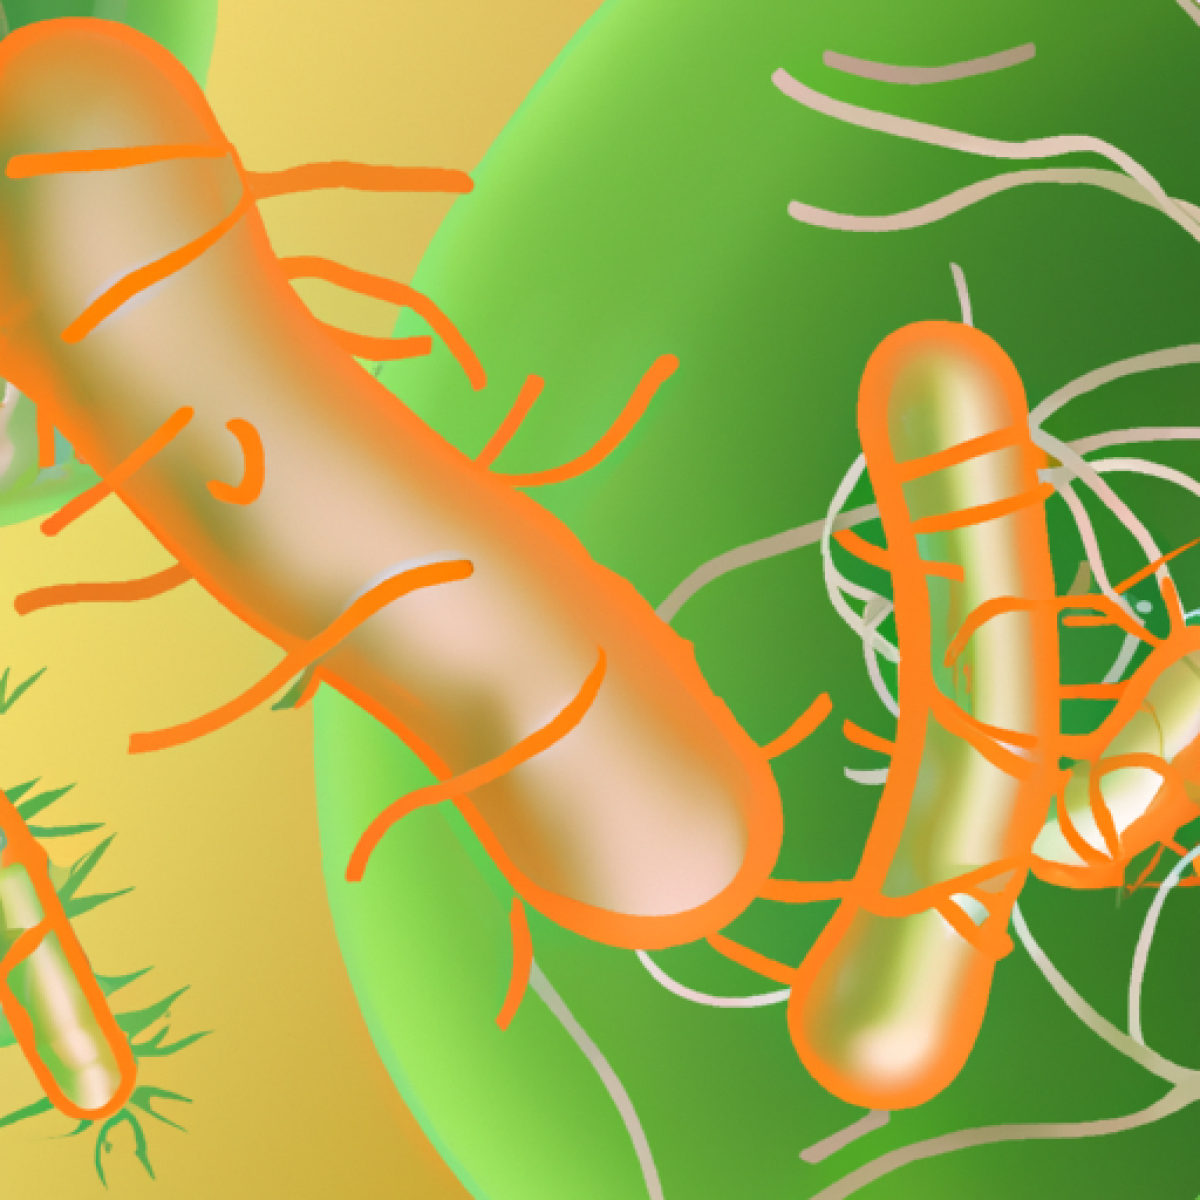 A detail image related to the topic: Bactericida